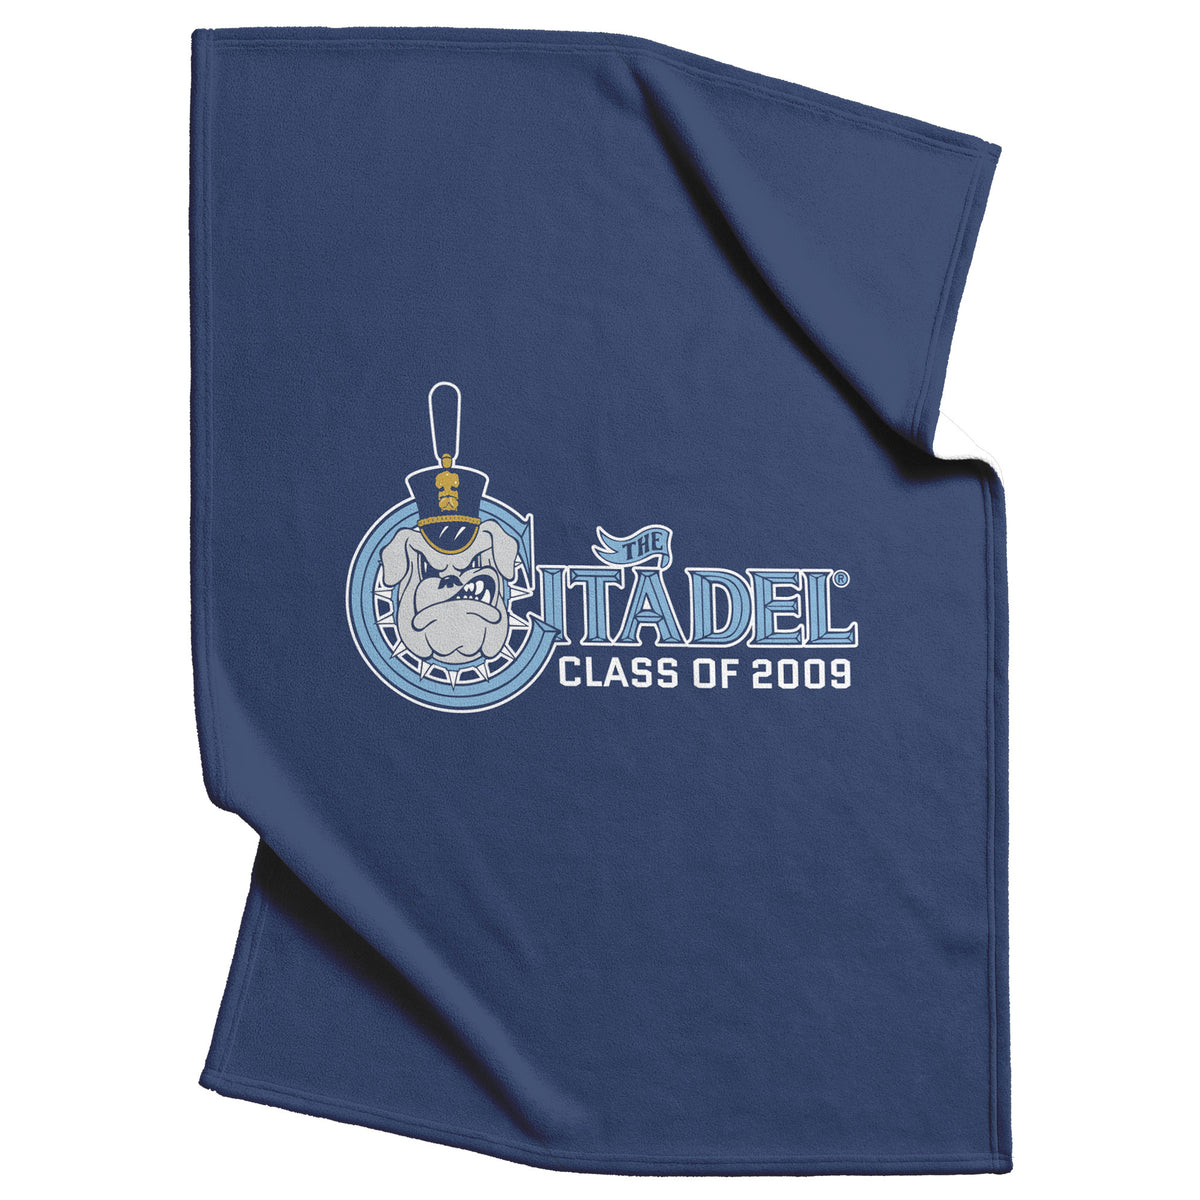 The Citadel Spike, Class of 2009 Blanket